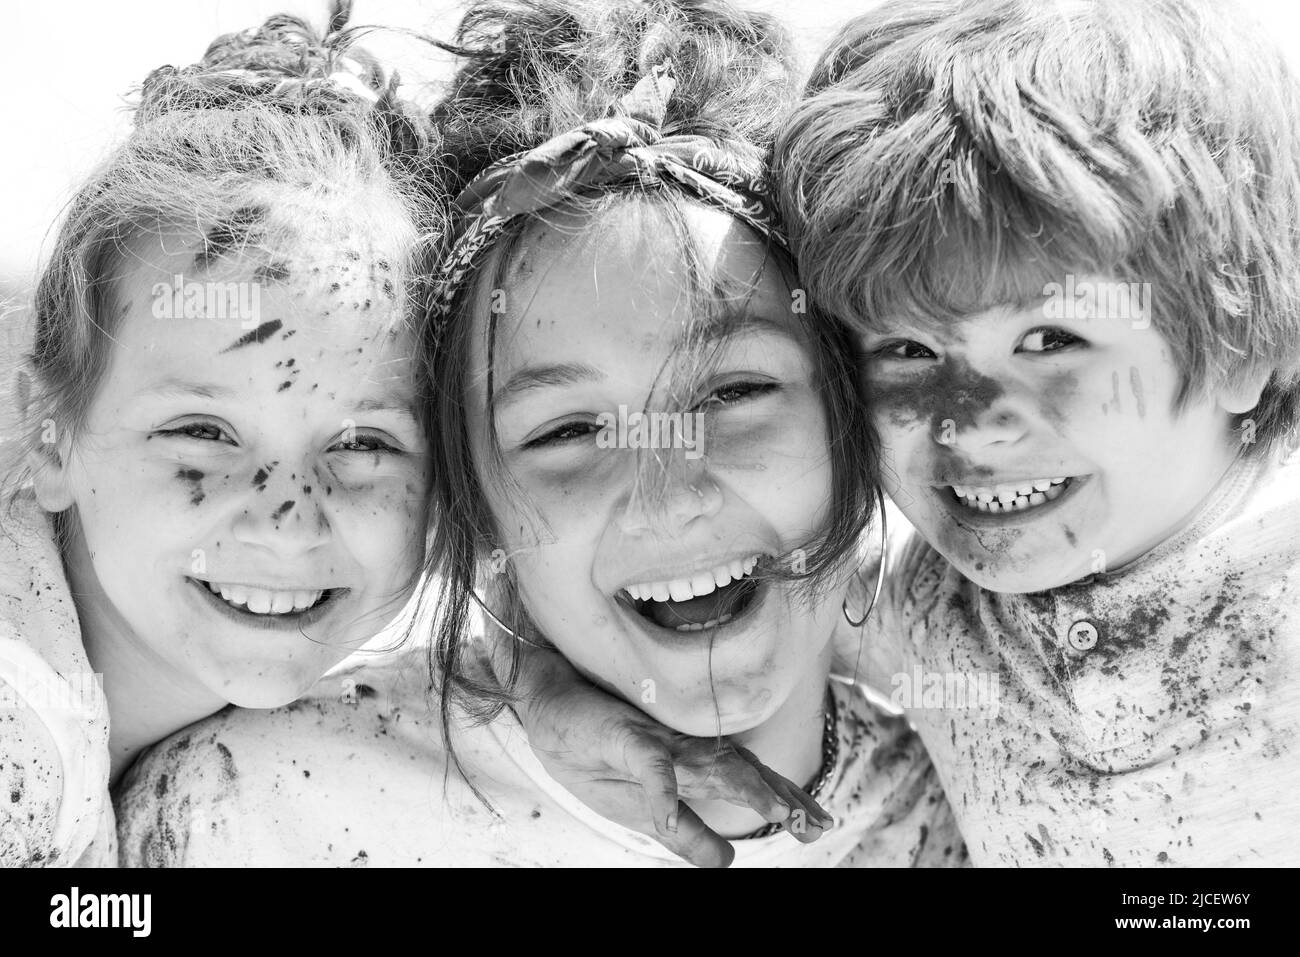 Close up portrait of happy excited litttle kids on holi color festival. Cute children with colorful paint powder on faces. Stock Photo